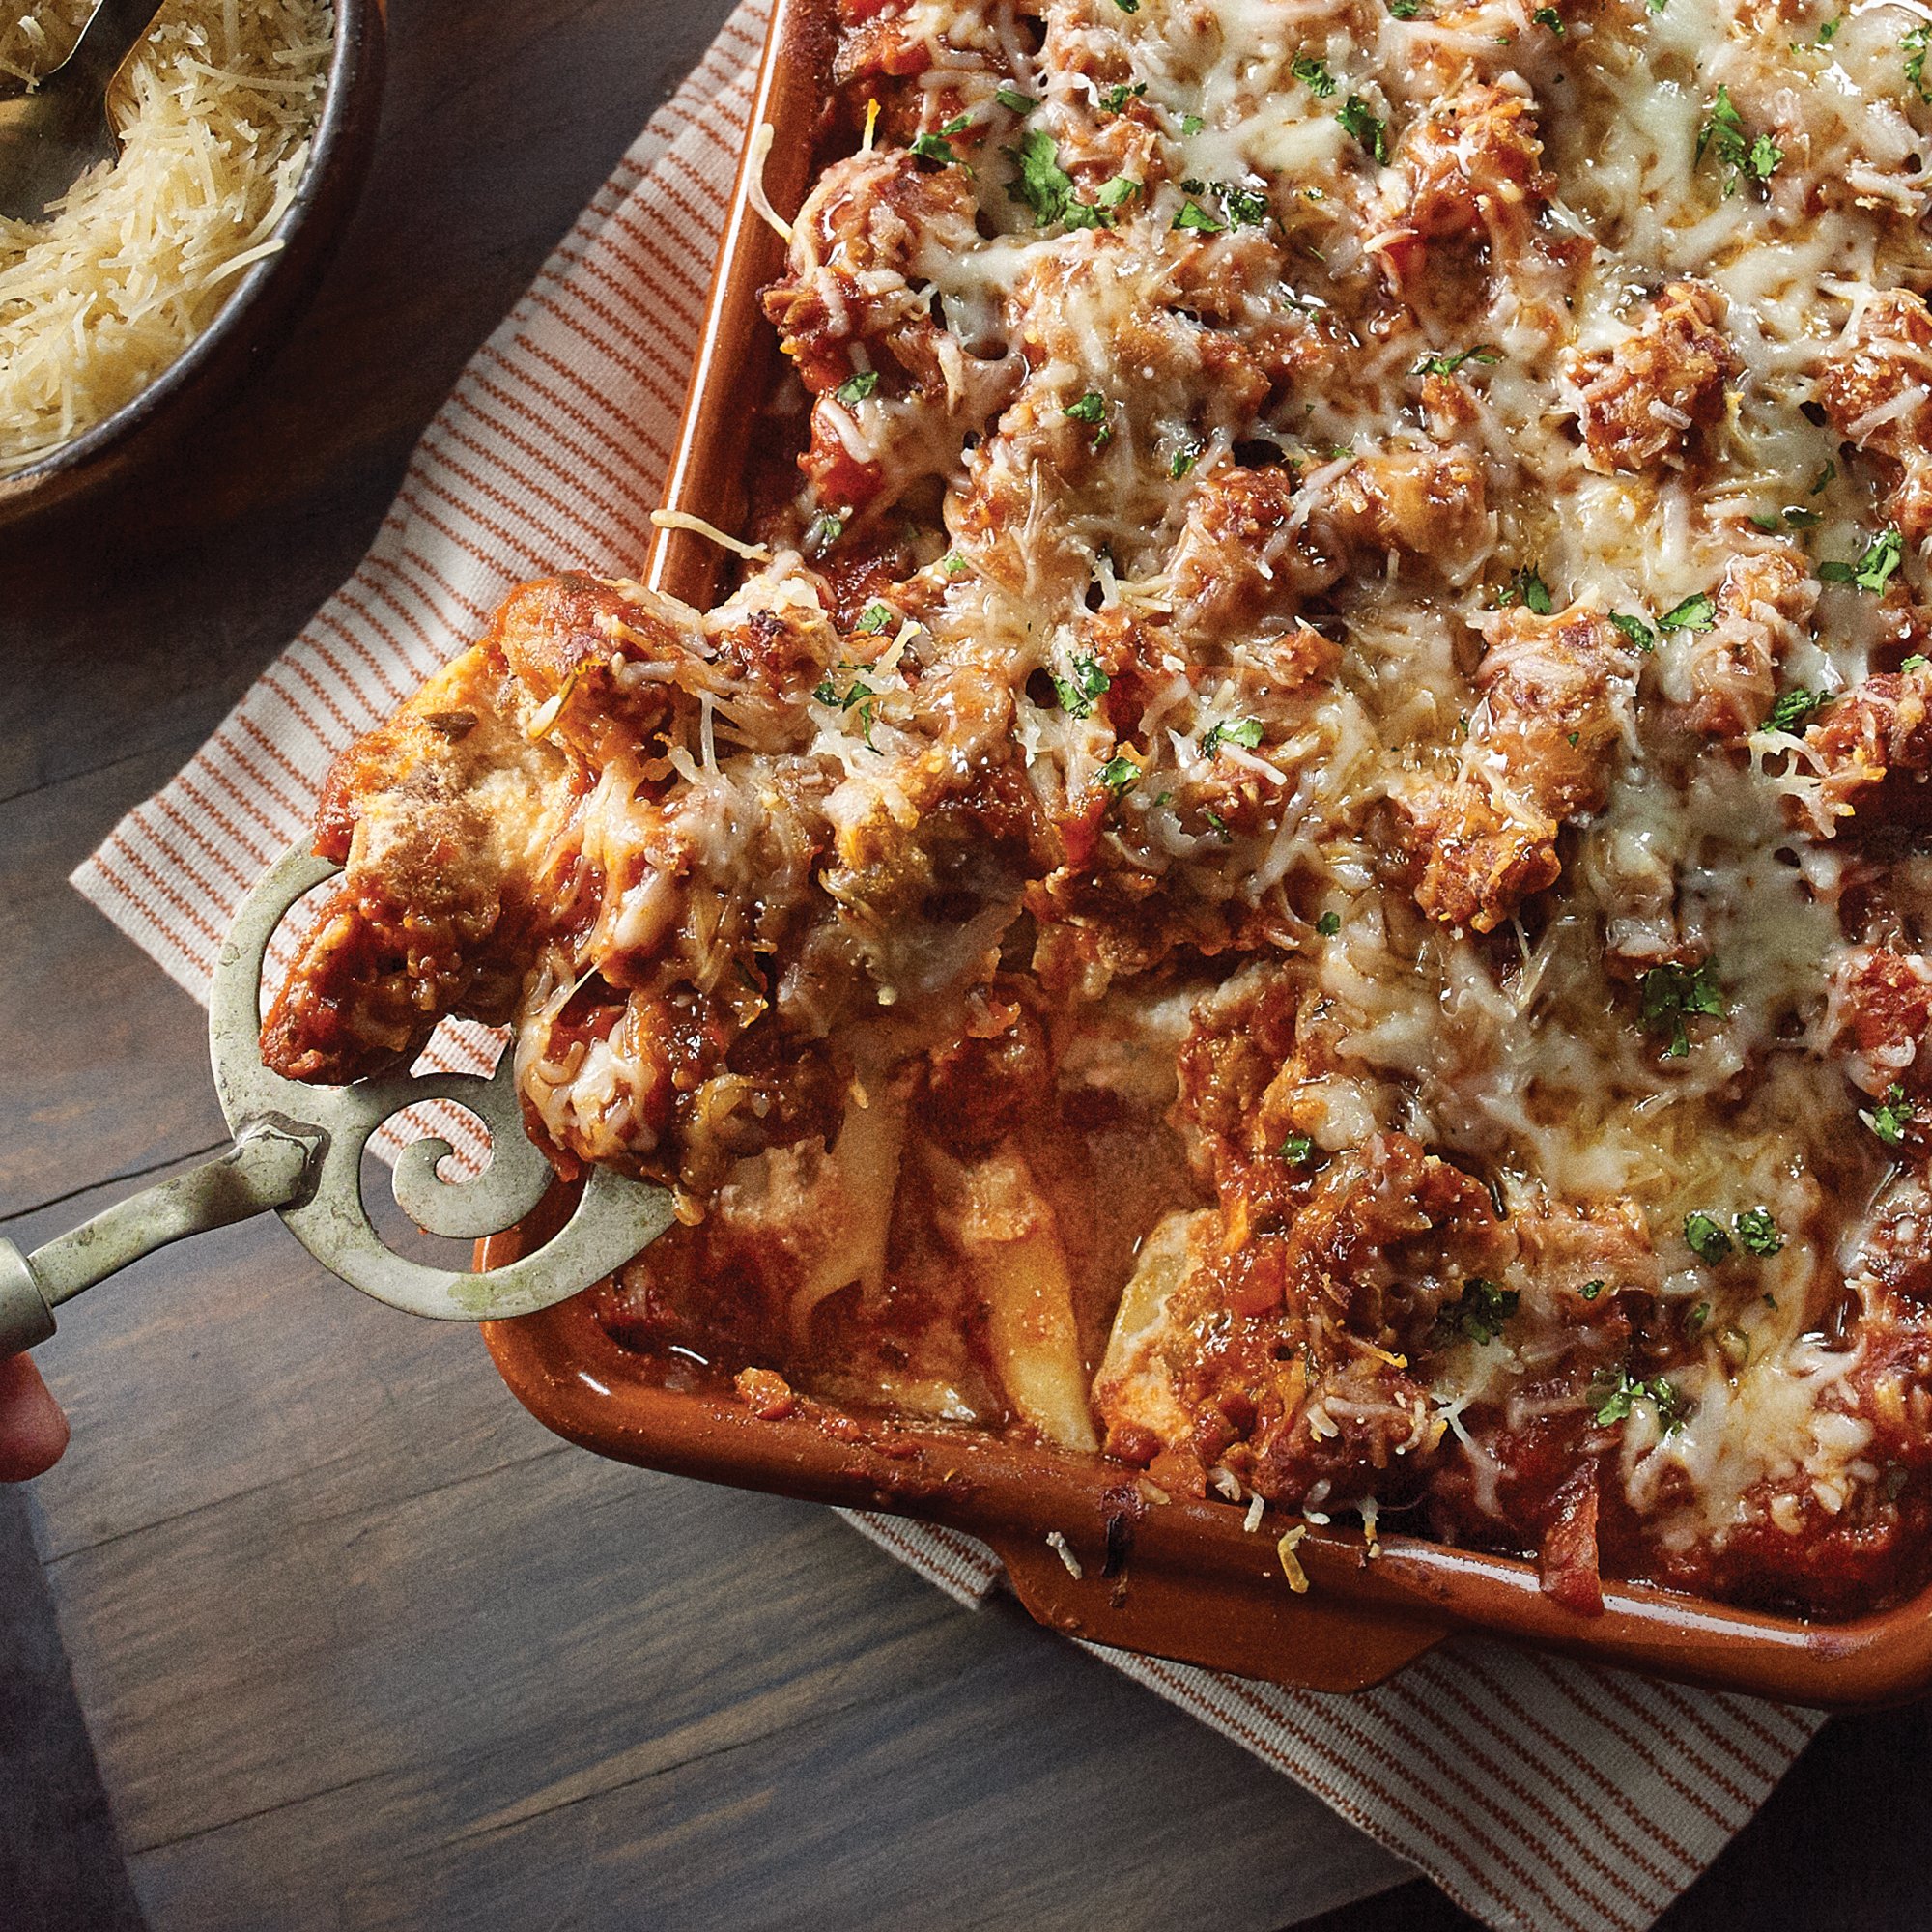 https://images.heb.com/is/image/HEBGrocery/Test/baked-ziti-with-turkey-sausage-recipe.jpg